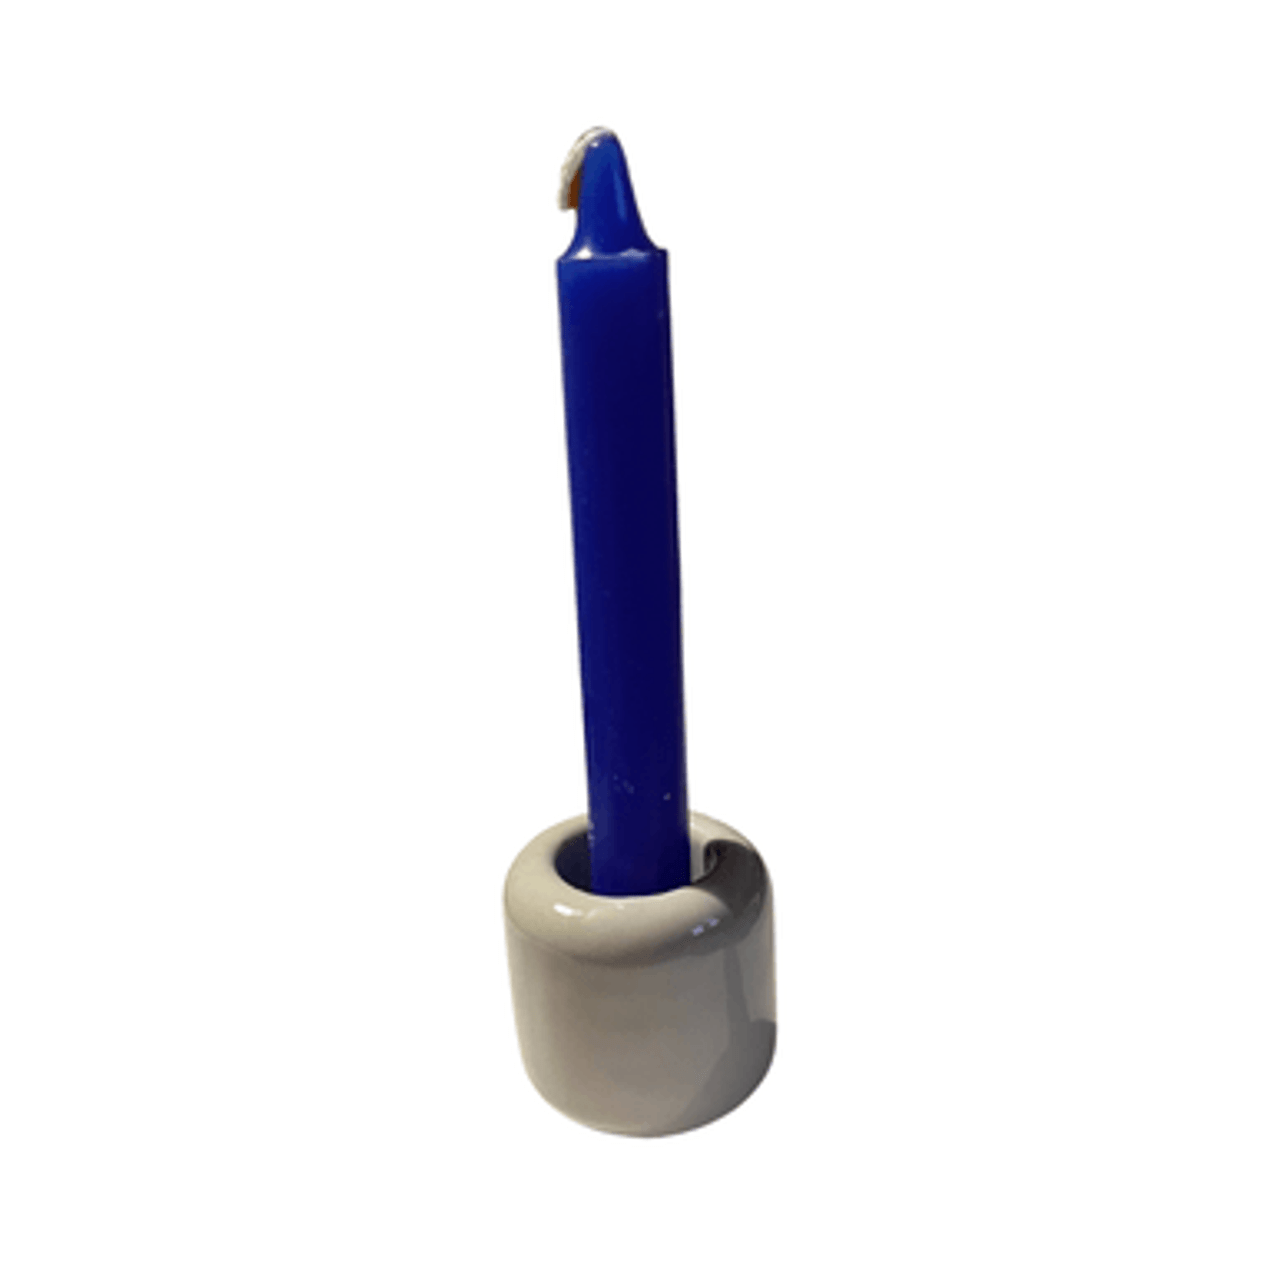 Spell Candle in White Holder